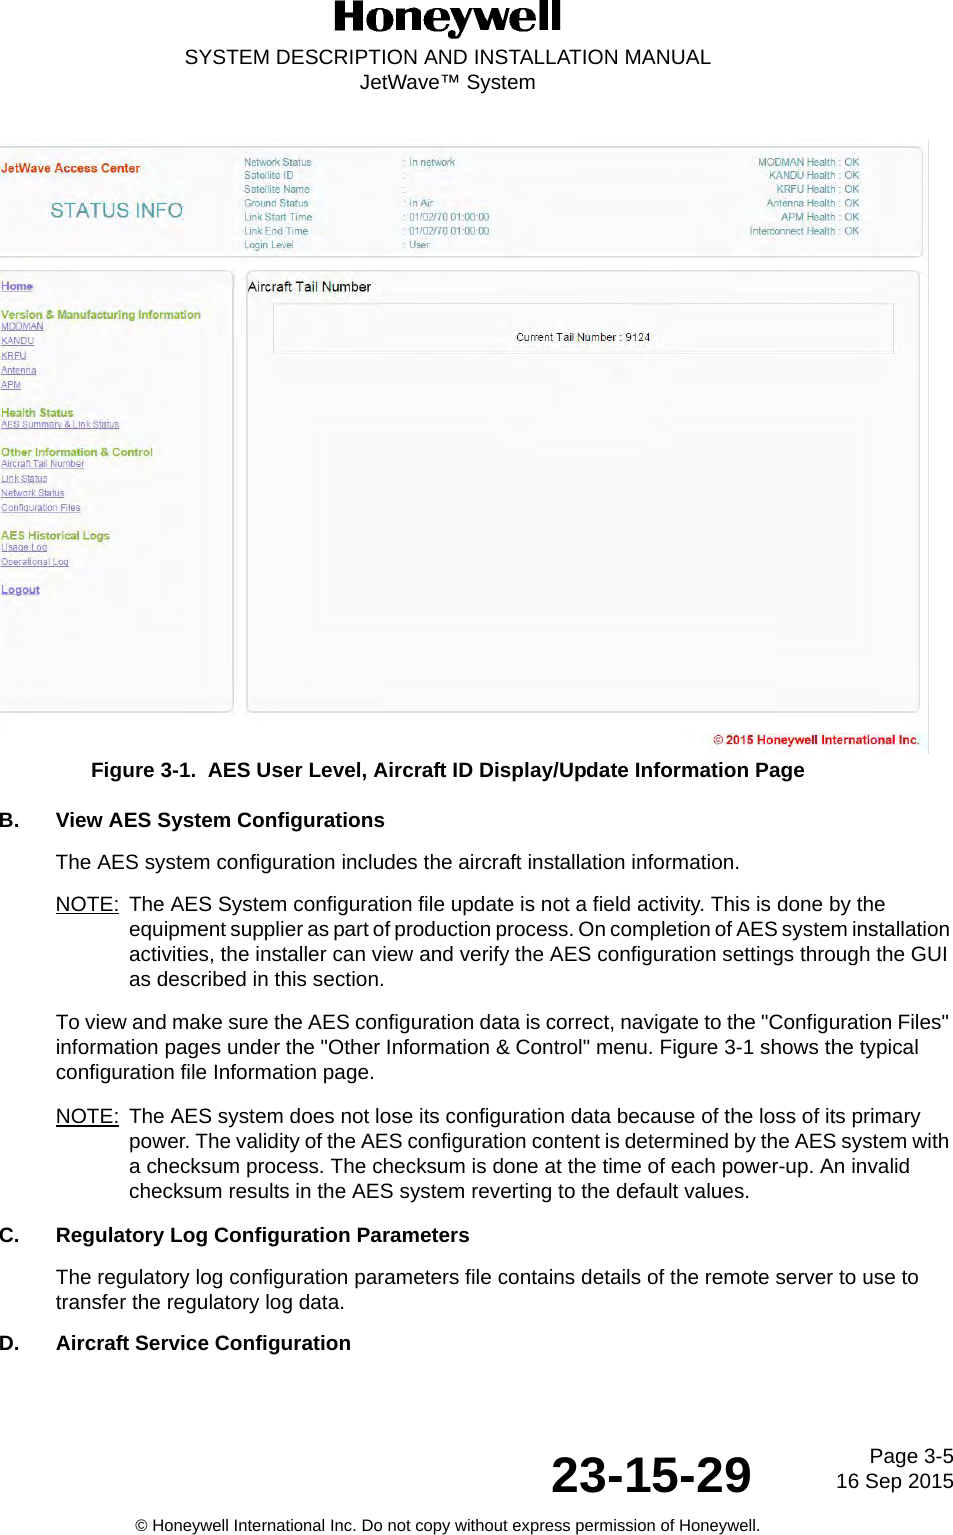 Page 3-516 Sep 201523-15-29SYSTEM DESCRIPTION AND INSTALLATION MANUALJetWave™ System© Honeywell International Inc. Do not copy without express permission of Honeywell.Figure 3-1.  AES User Level, Aircraft ID Display/Update Information PageB. View AES System ConfigurationsThe AES system configuration includes the aircraft installation information. NOTE: The AES System configuration file update is not a field activity. This is done by the equipment supplier as part of production process. On completion of AES system installation activities, the installer can view and verify the AES configuration settings through the GUI as described in this section.To view and make sure the AES configuration data is correct, navigate to the &quot;Configuration Files&quot; information pages under the &quot;Other Information &amp; Control&quot; menu. Figure 3-1 shows the typical configuration file Information page. NOTE: The AES system does not lose its configuration data because of the loss of its primary power. The validity of the AES configuration content is determined by the AES system with a checksum process. The checksum is done at the time of each power-up. An invalid checksum results in the AES system reverting to the default values.C. Regulatory Log Configuration ParametersThe regulatory log configuration parameters file contains details of the remote server to use to transfer the regulatory log data.D. Aircraft Service Configuration